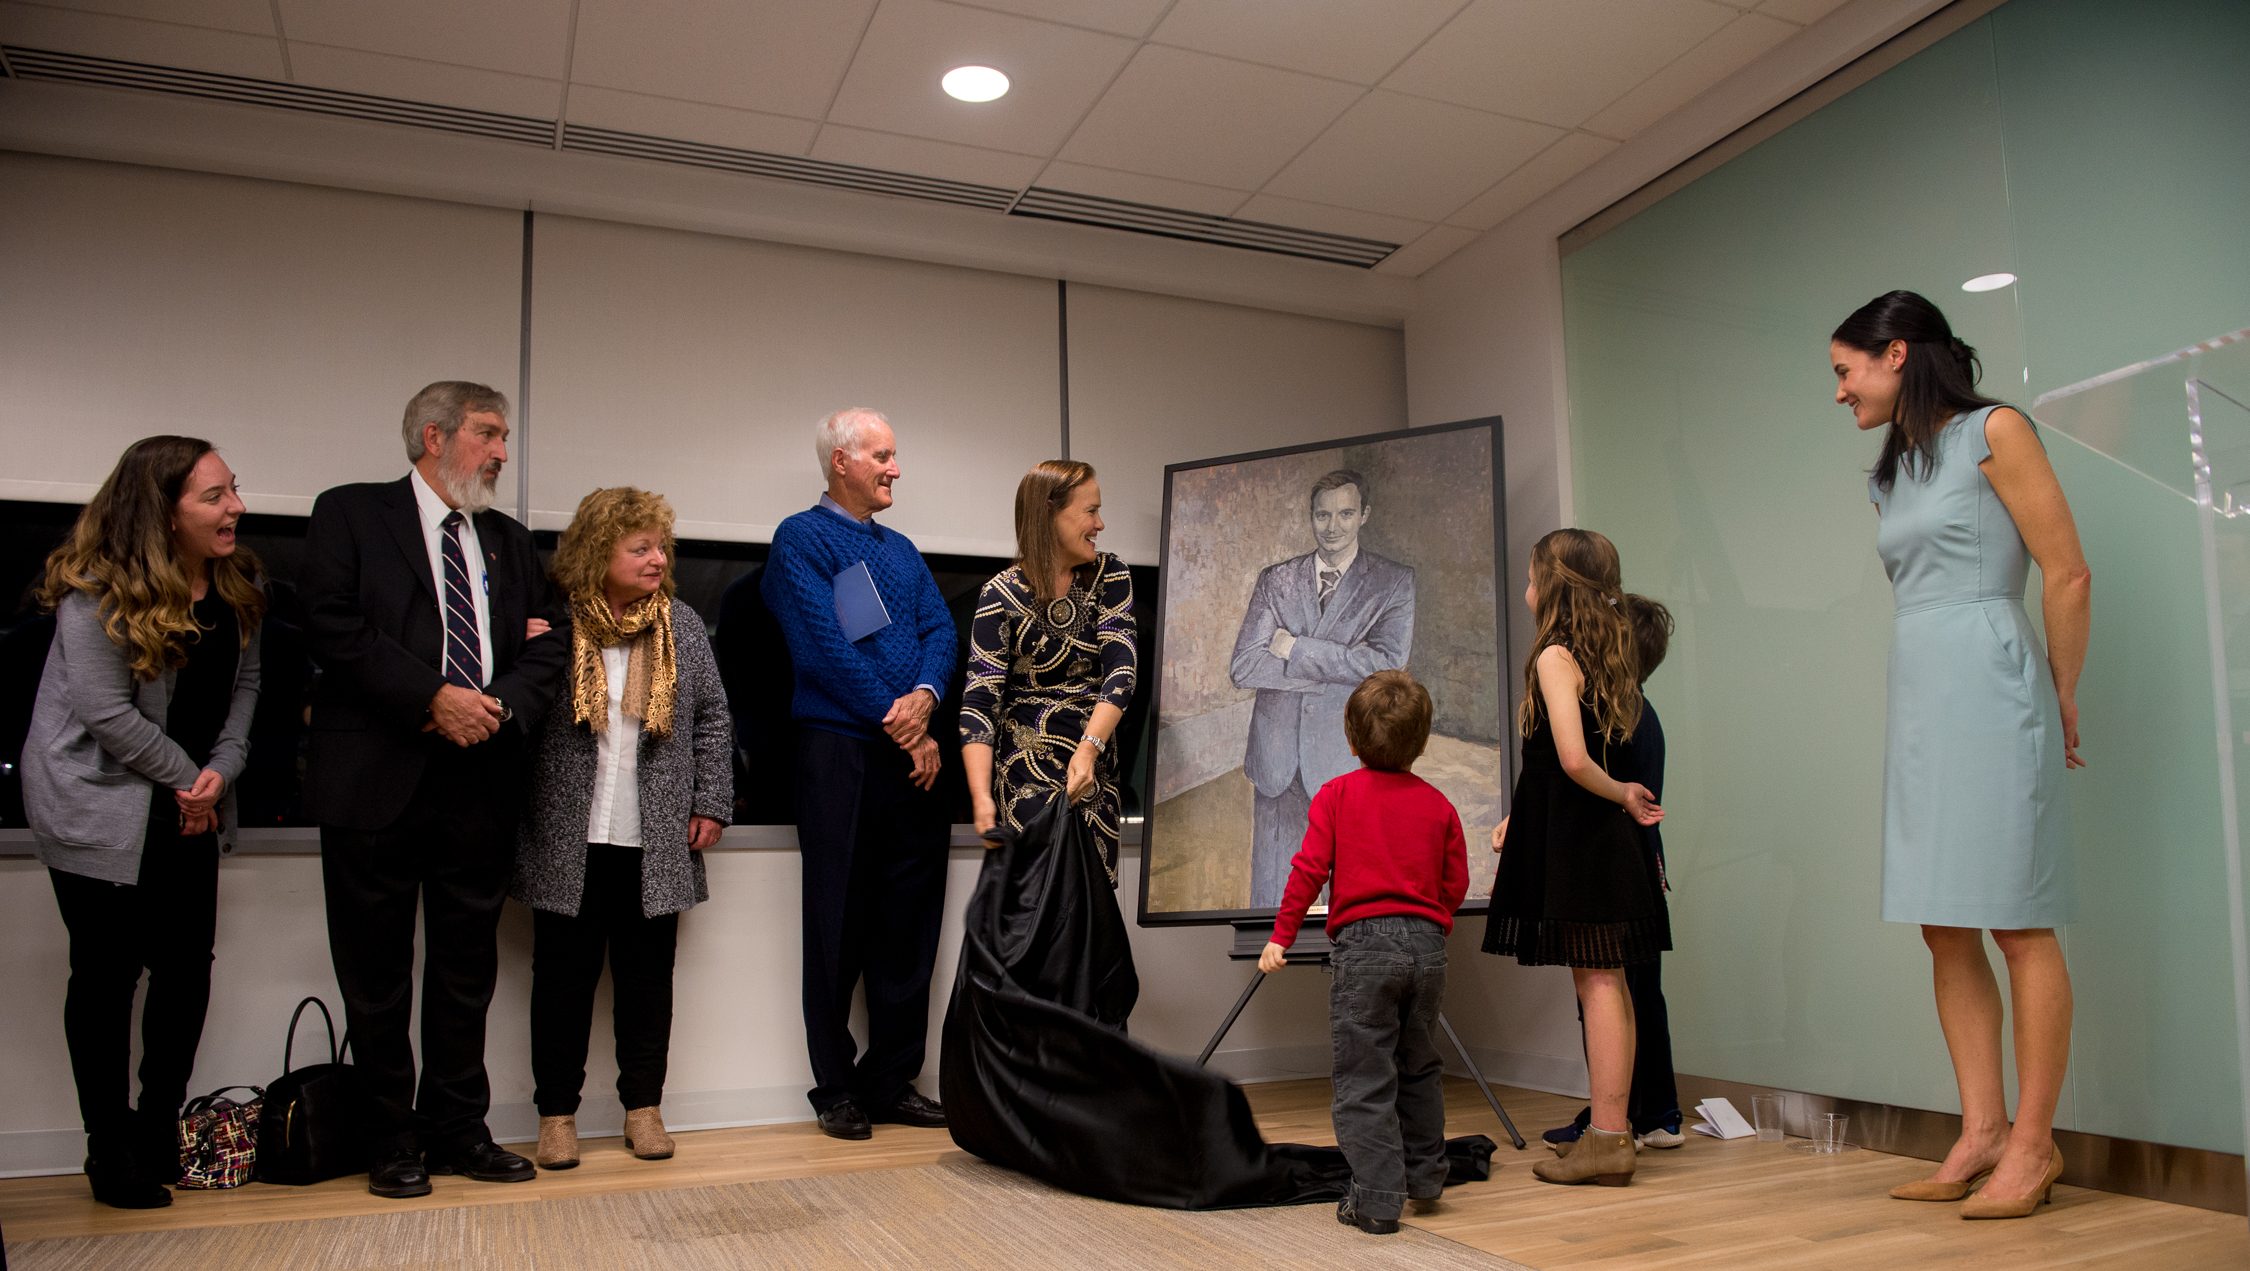 Shawn Brimley's family at the CNAS portrait dedication in DC